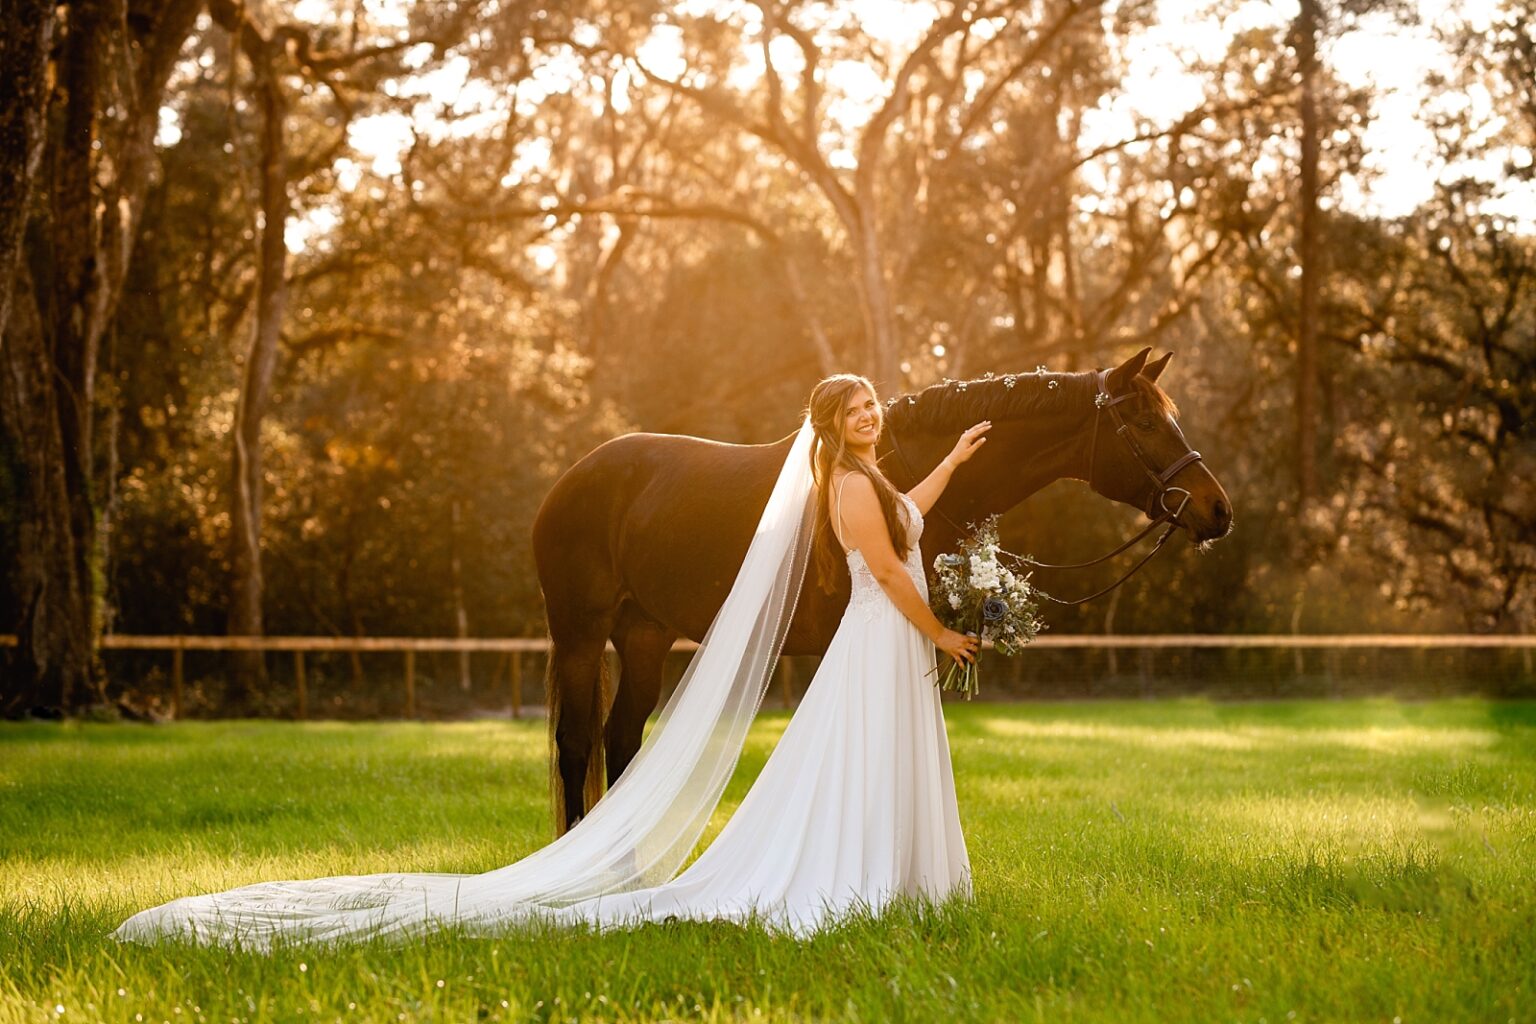 Equestrian bride takes pictures with her horse at her wedding. She put baby's breath in the horses mane. Posing ideas for bride and horse.